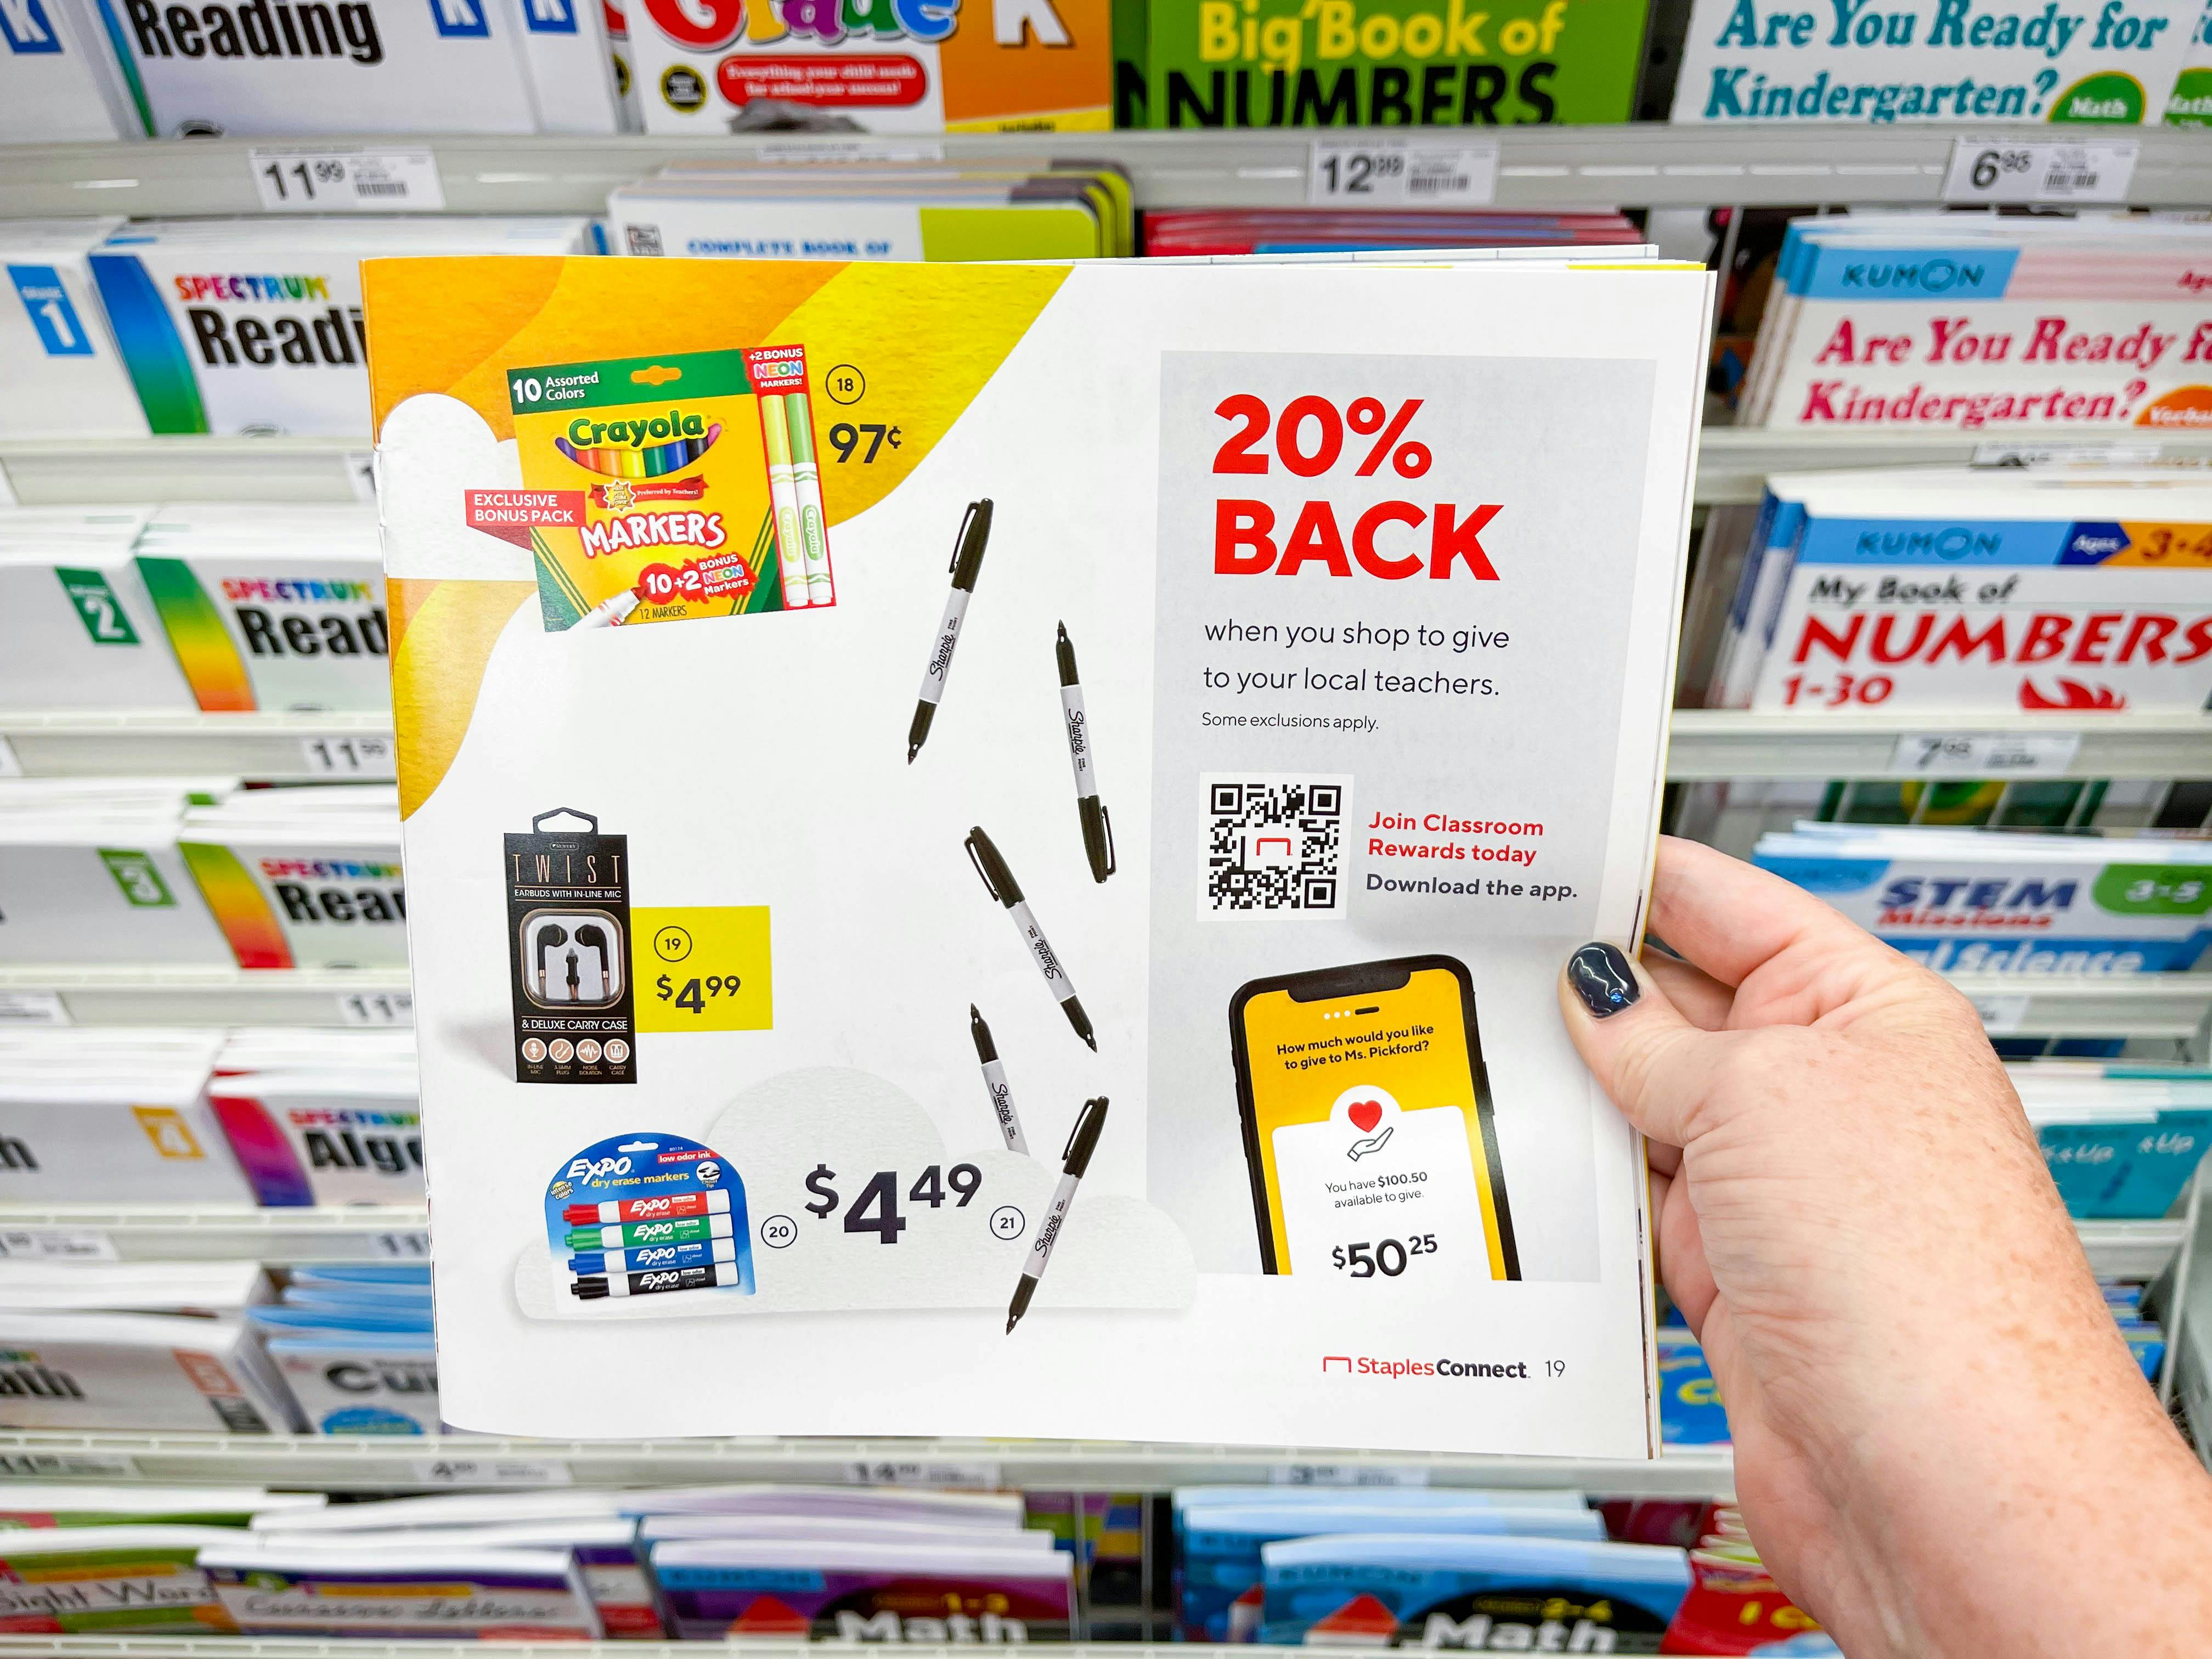 A person's hand holding up a paper advertisement for Classroom Rewards at Staples.